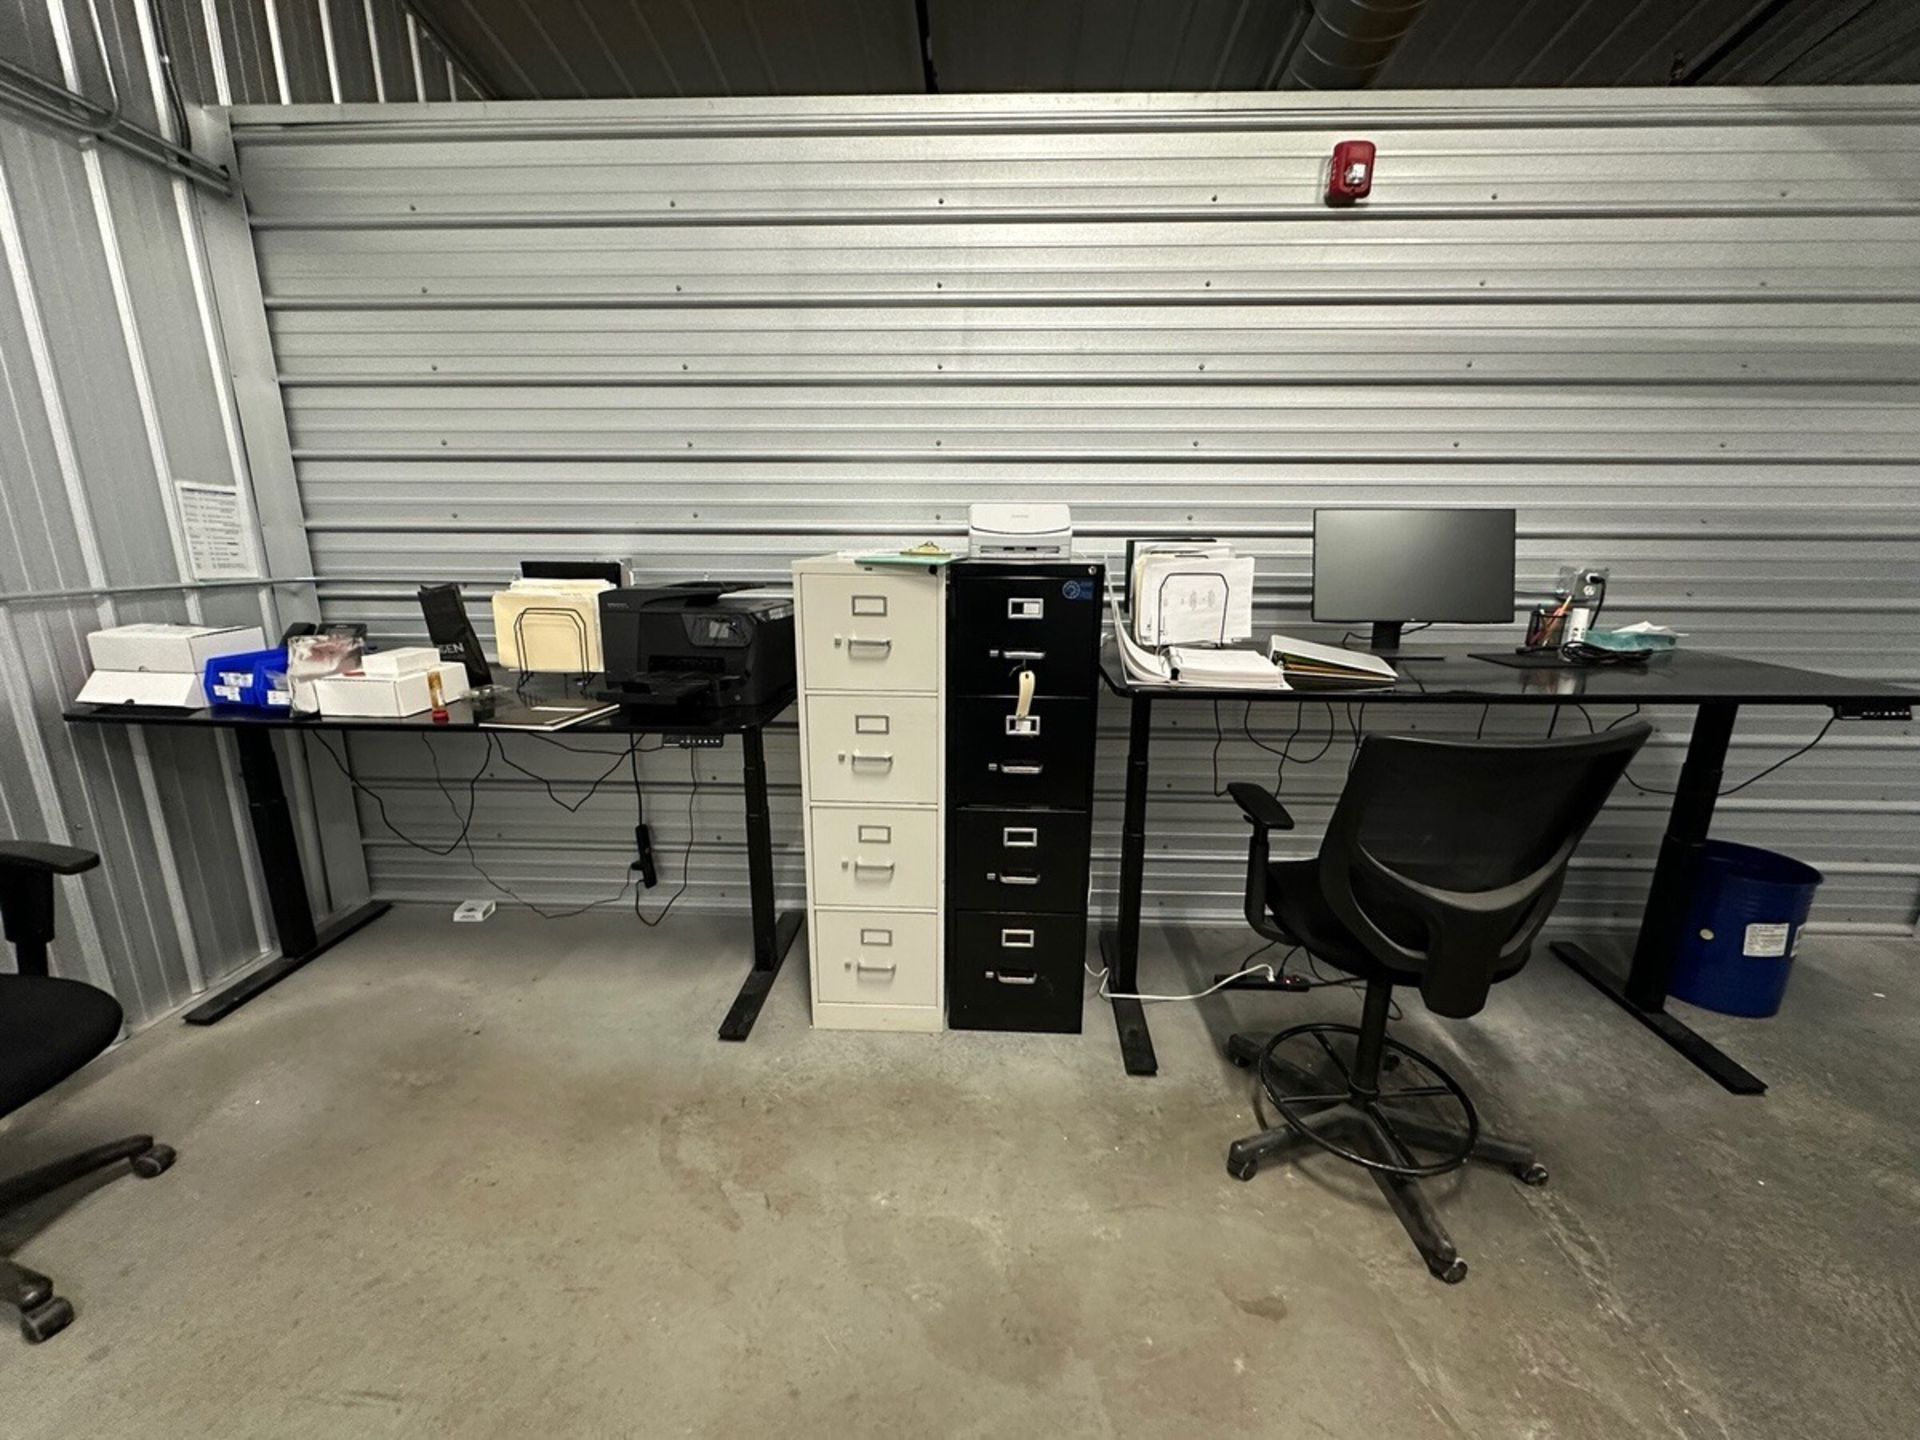 Lot of Desks, And all Contents, Chairs, Monitors, Excludes Printers | Rig Fee $350